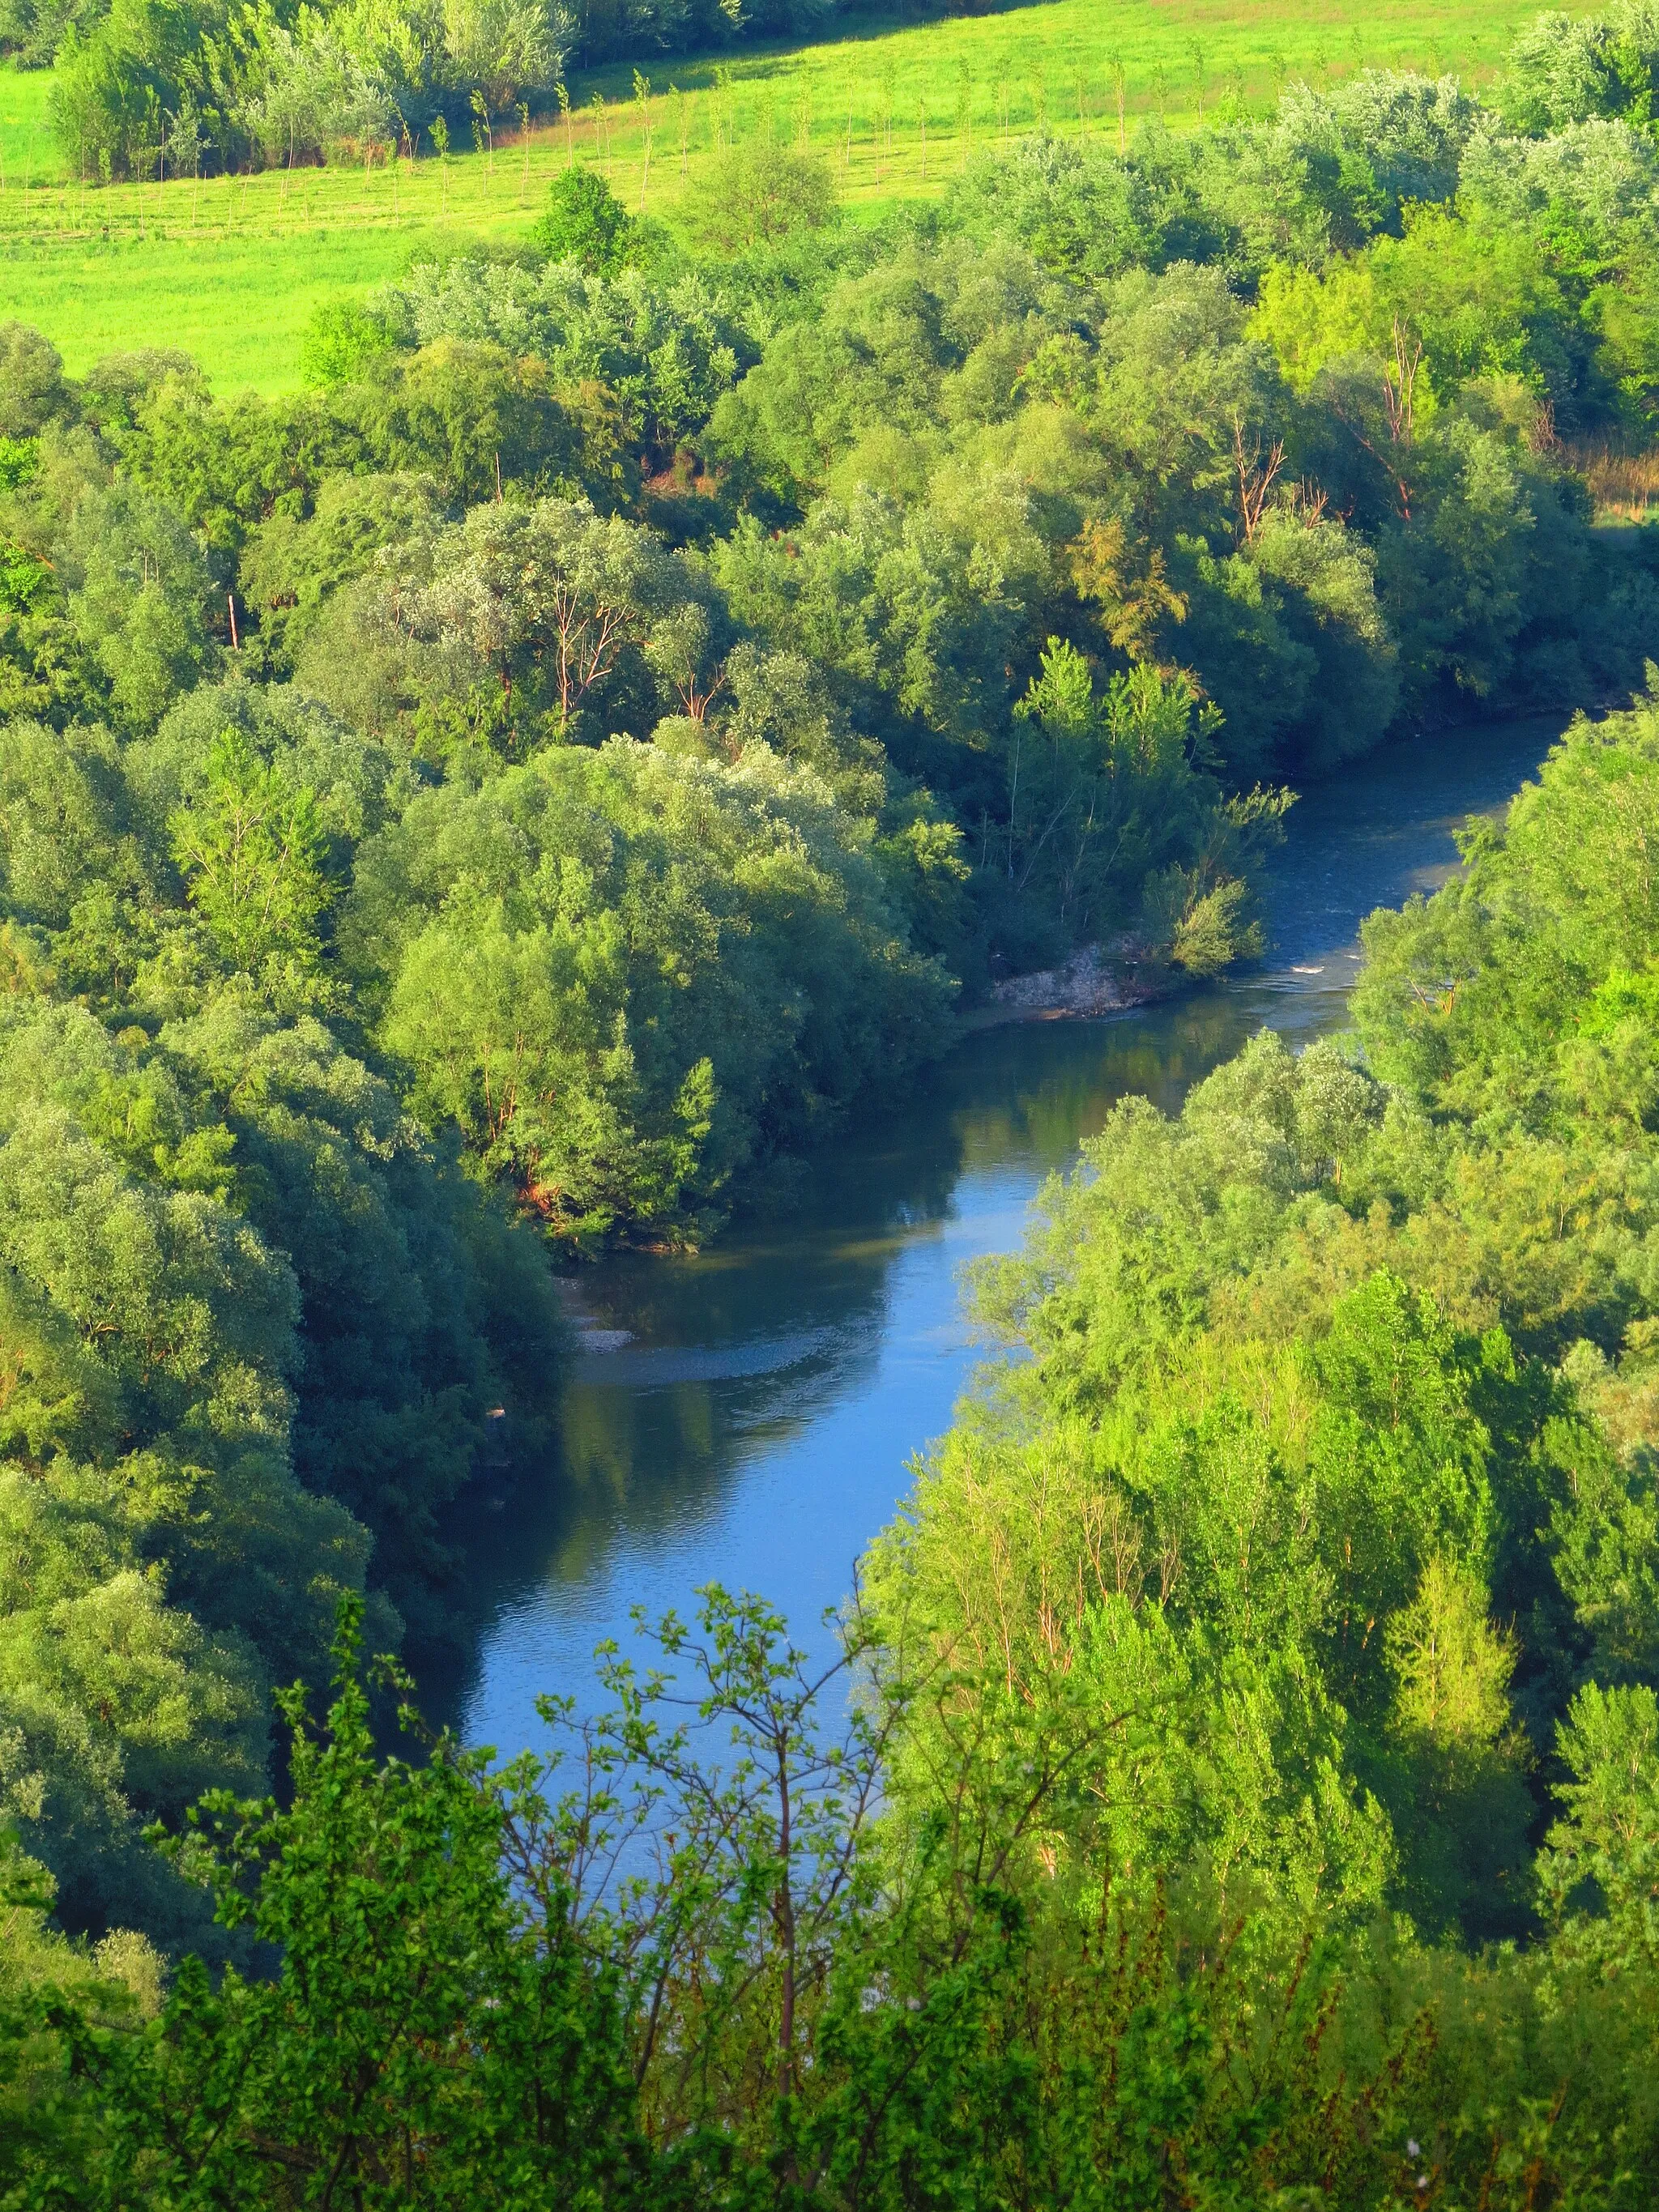 Photo showing: Calore (Irpino) river as seen from the historical center of Castelpoto, province of Benevento, Campania.